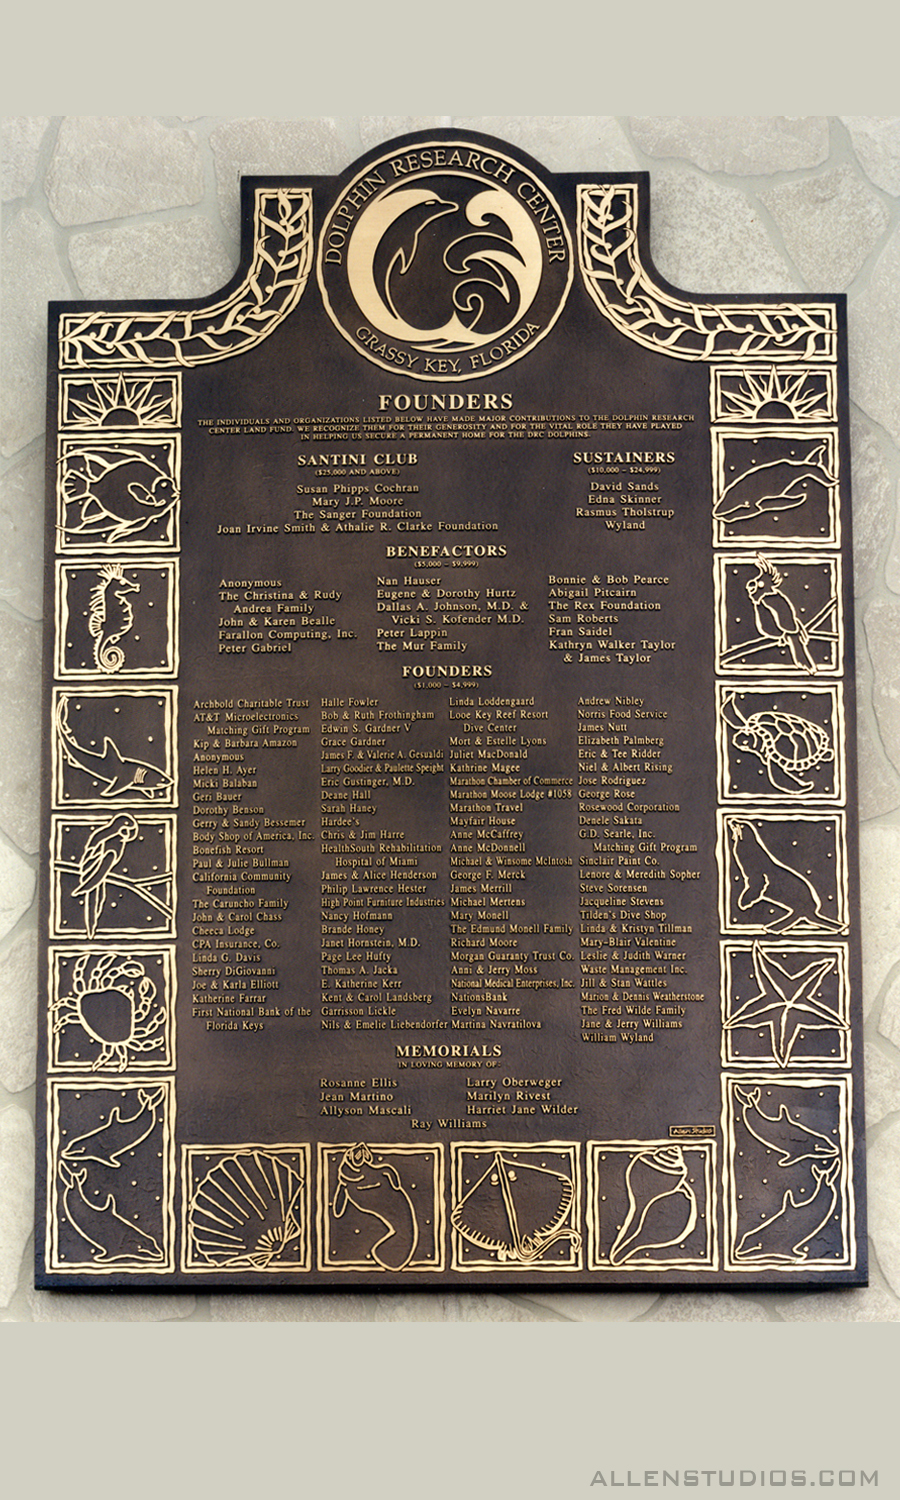 dolphin research center plaque.jpg